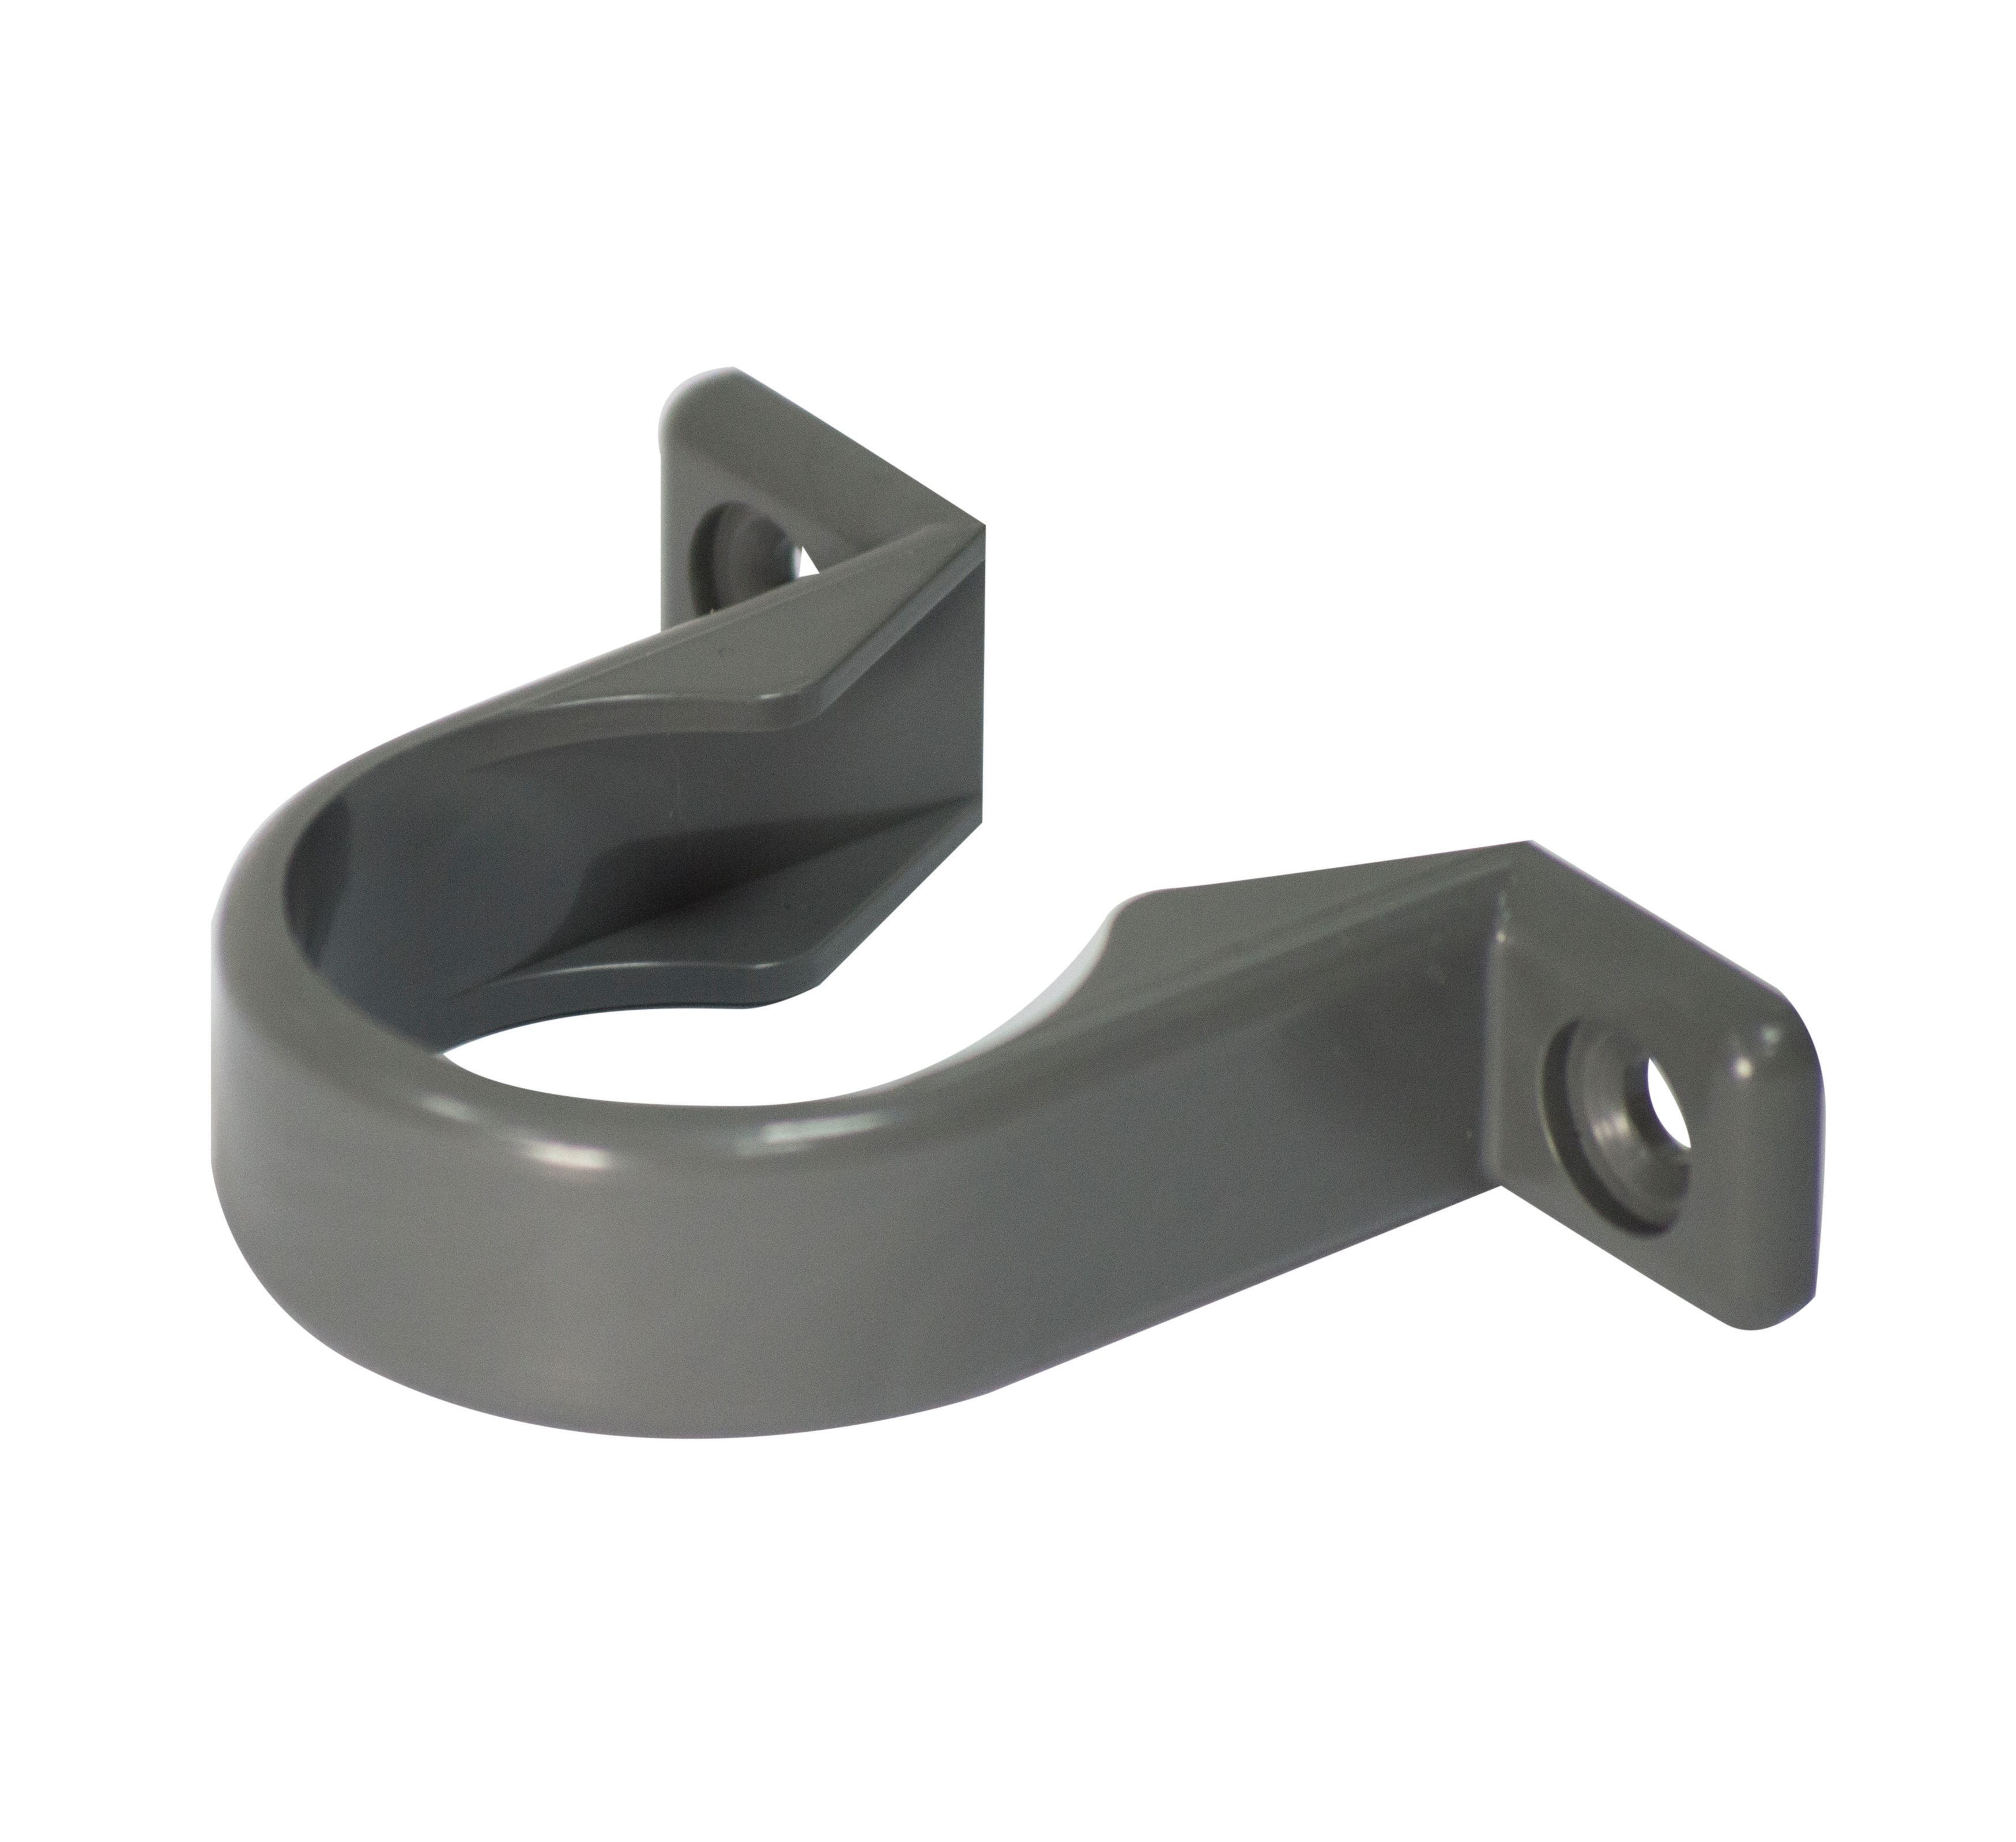 Image of FloPlast WS34G Solvent Weld Waste Pipe Clips - Grey 32mm Pack of 3